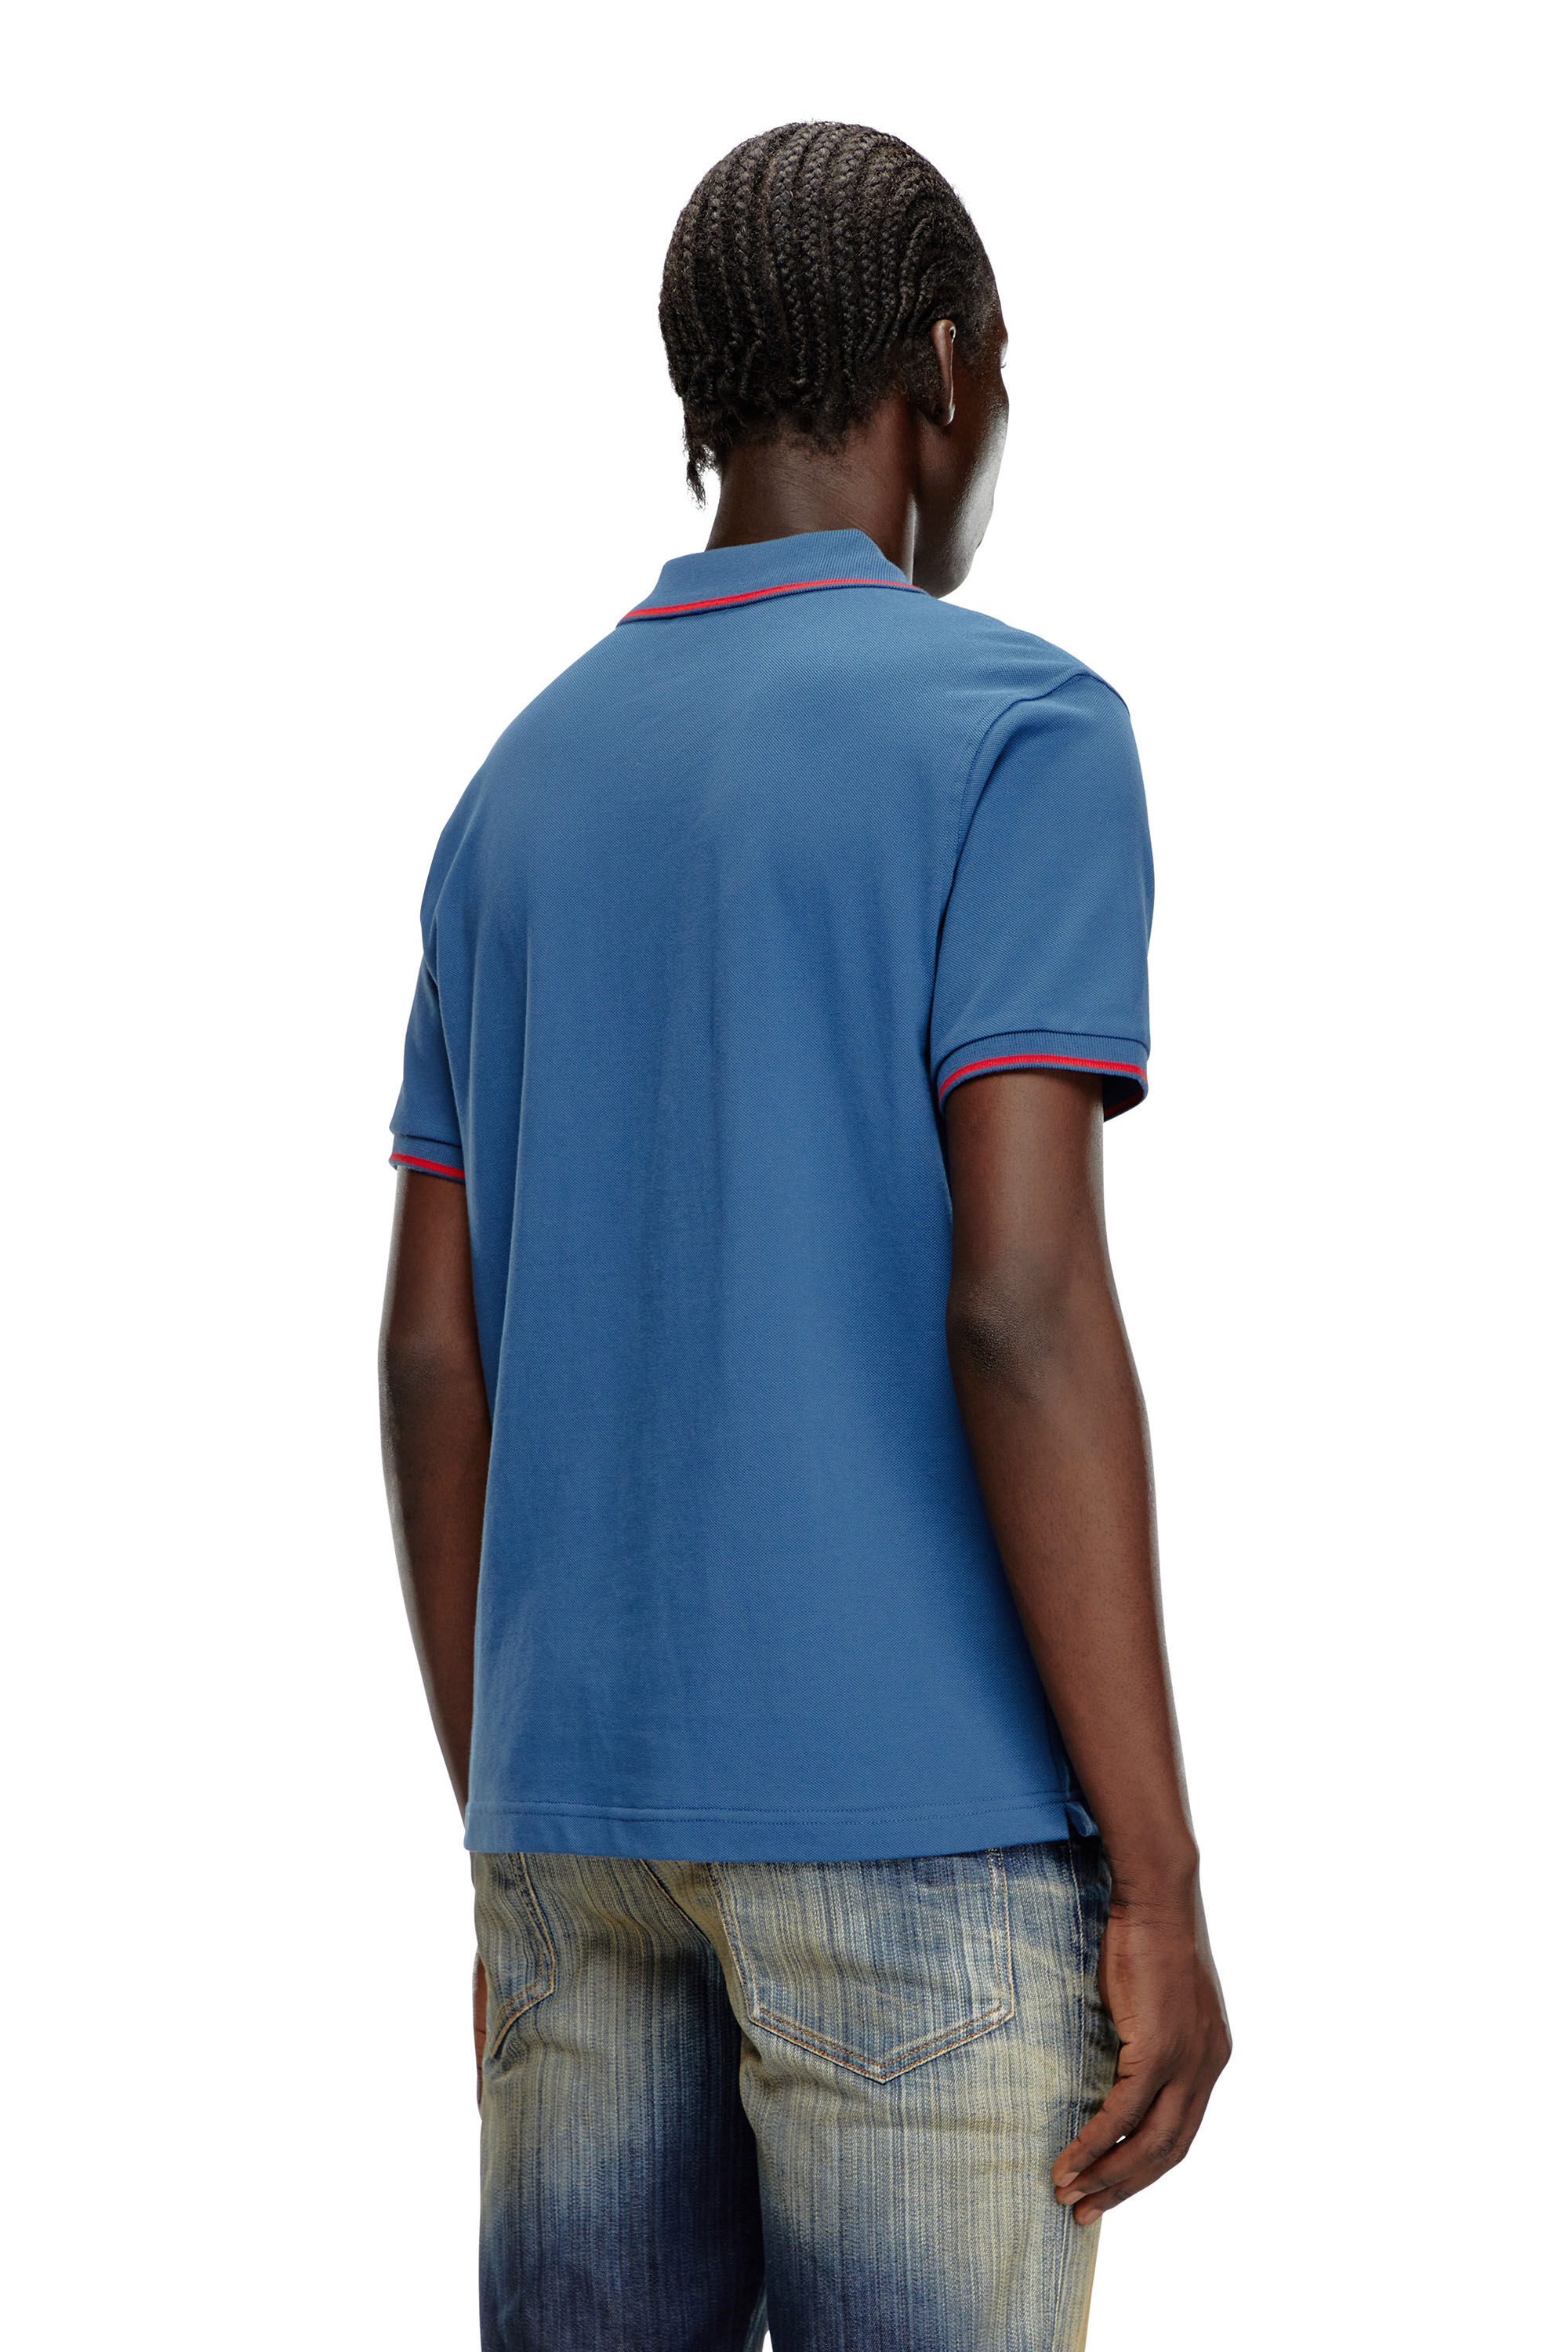 Diesel - T-FERRY-MICRODIV, Man Polo shirt with micro Diesel embroidery in Blue - Image 4